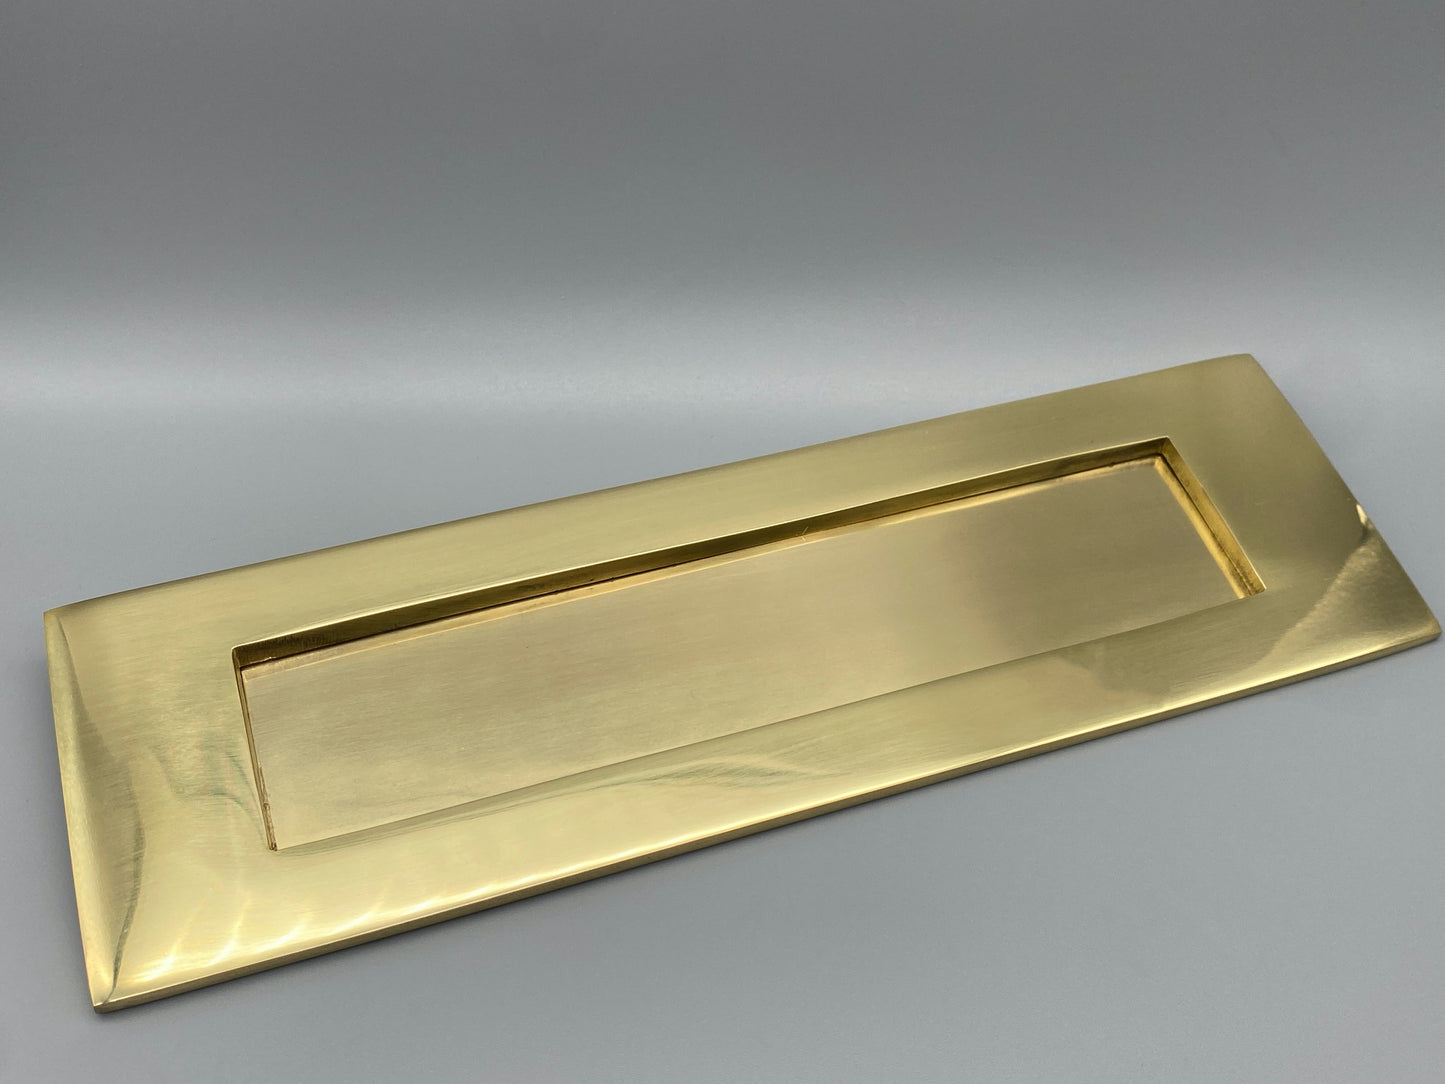 Solid Brass Victorian Letter Plate - 250mm x 75mm / (10" x 3")